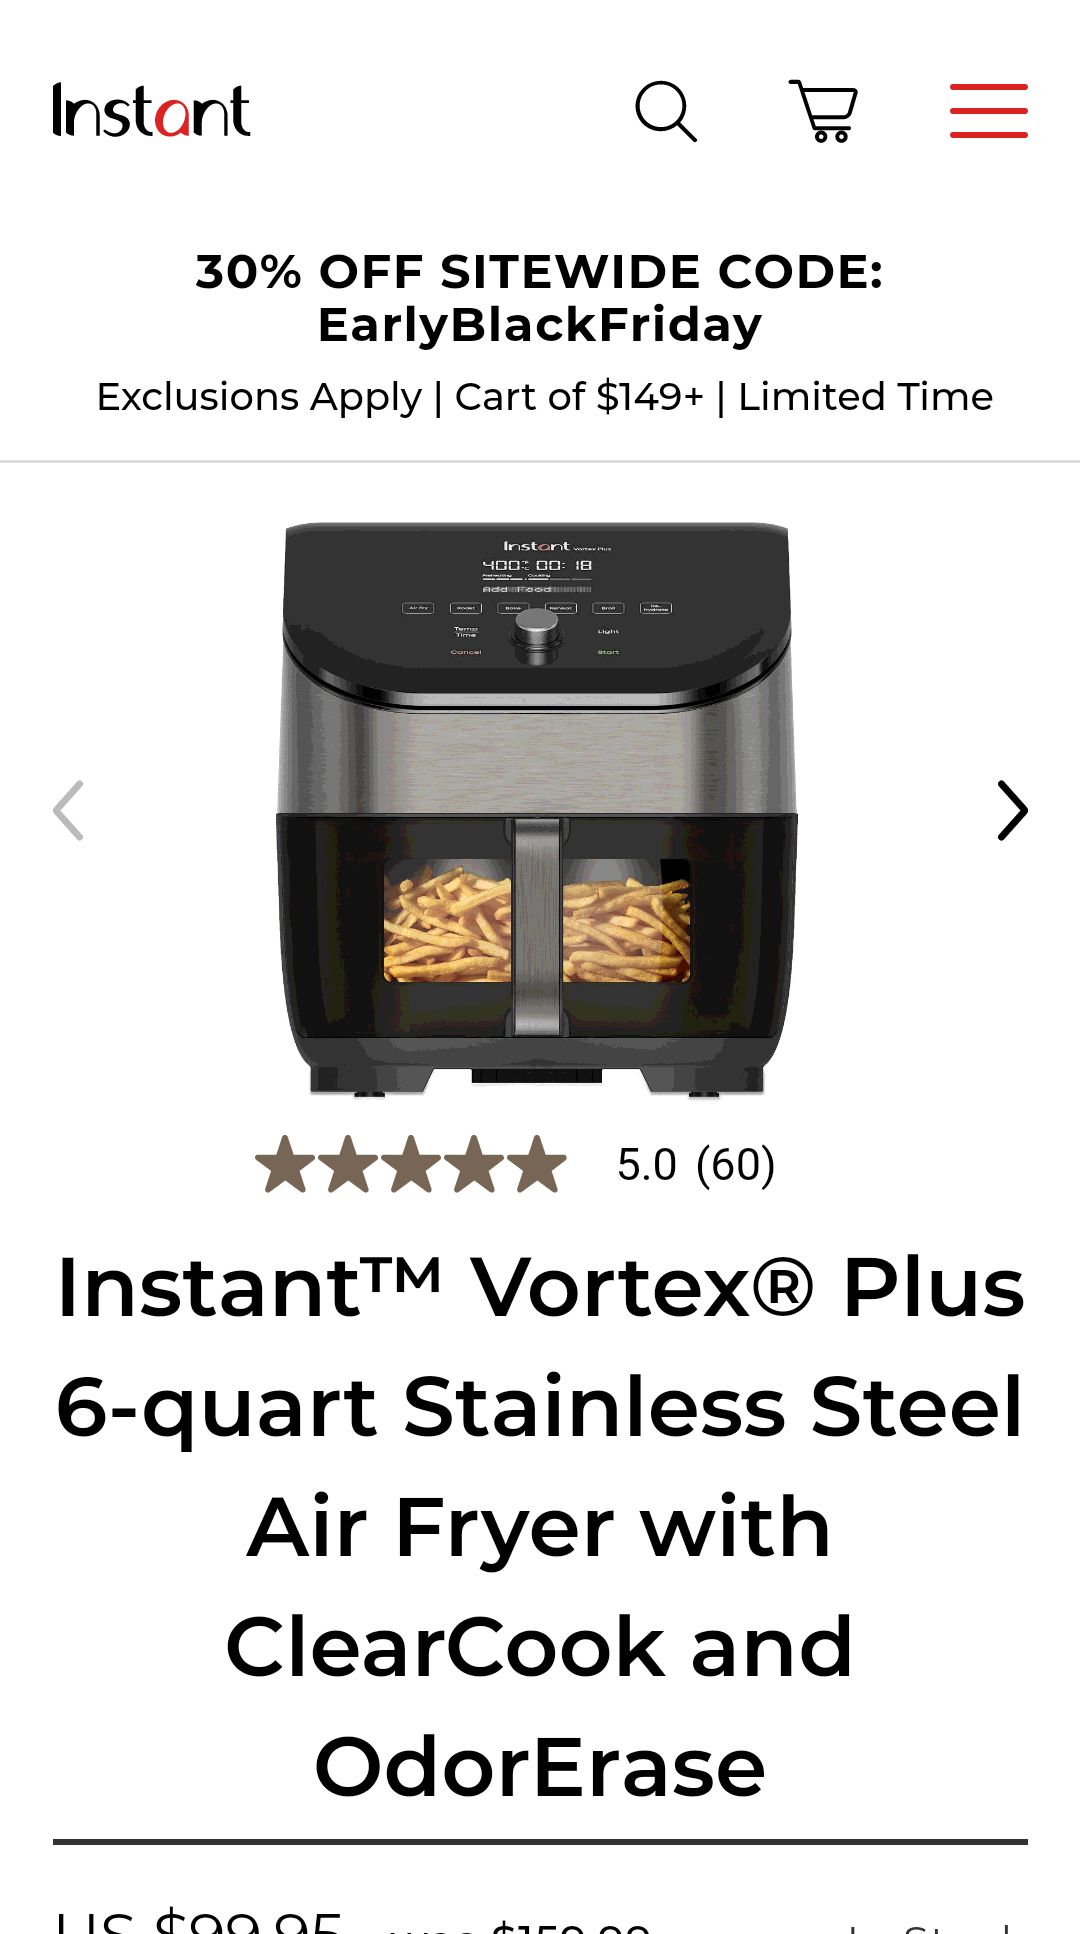 Instant™ Vortex® Plus 6-quart Stainless Steel Air Fryer with ClearCook and OdorErase | Instant Home